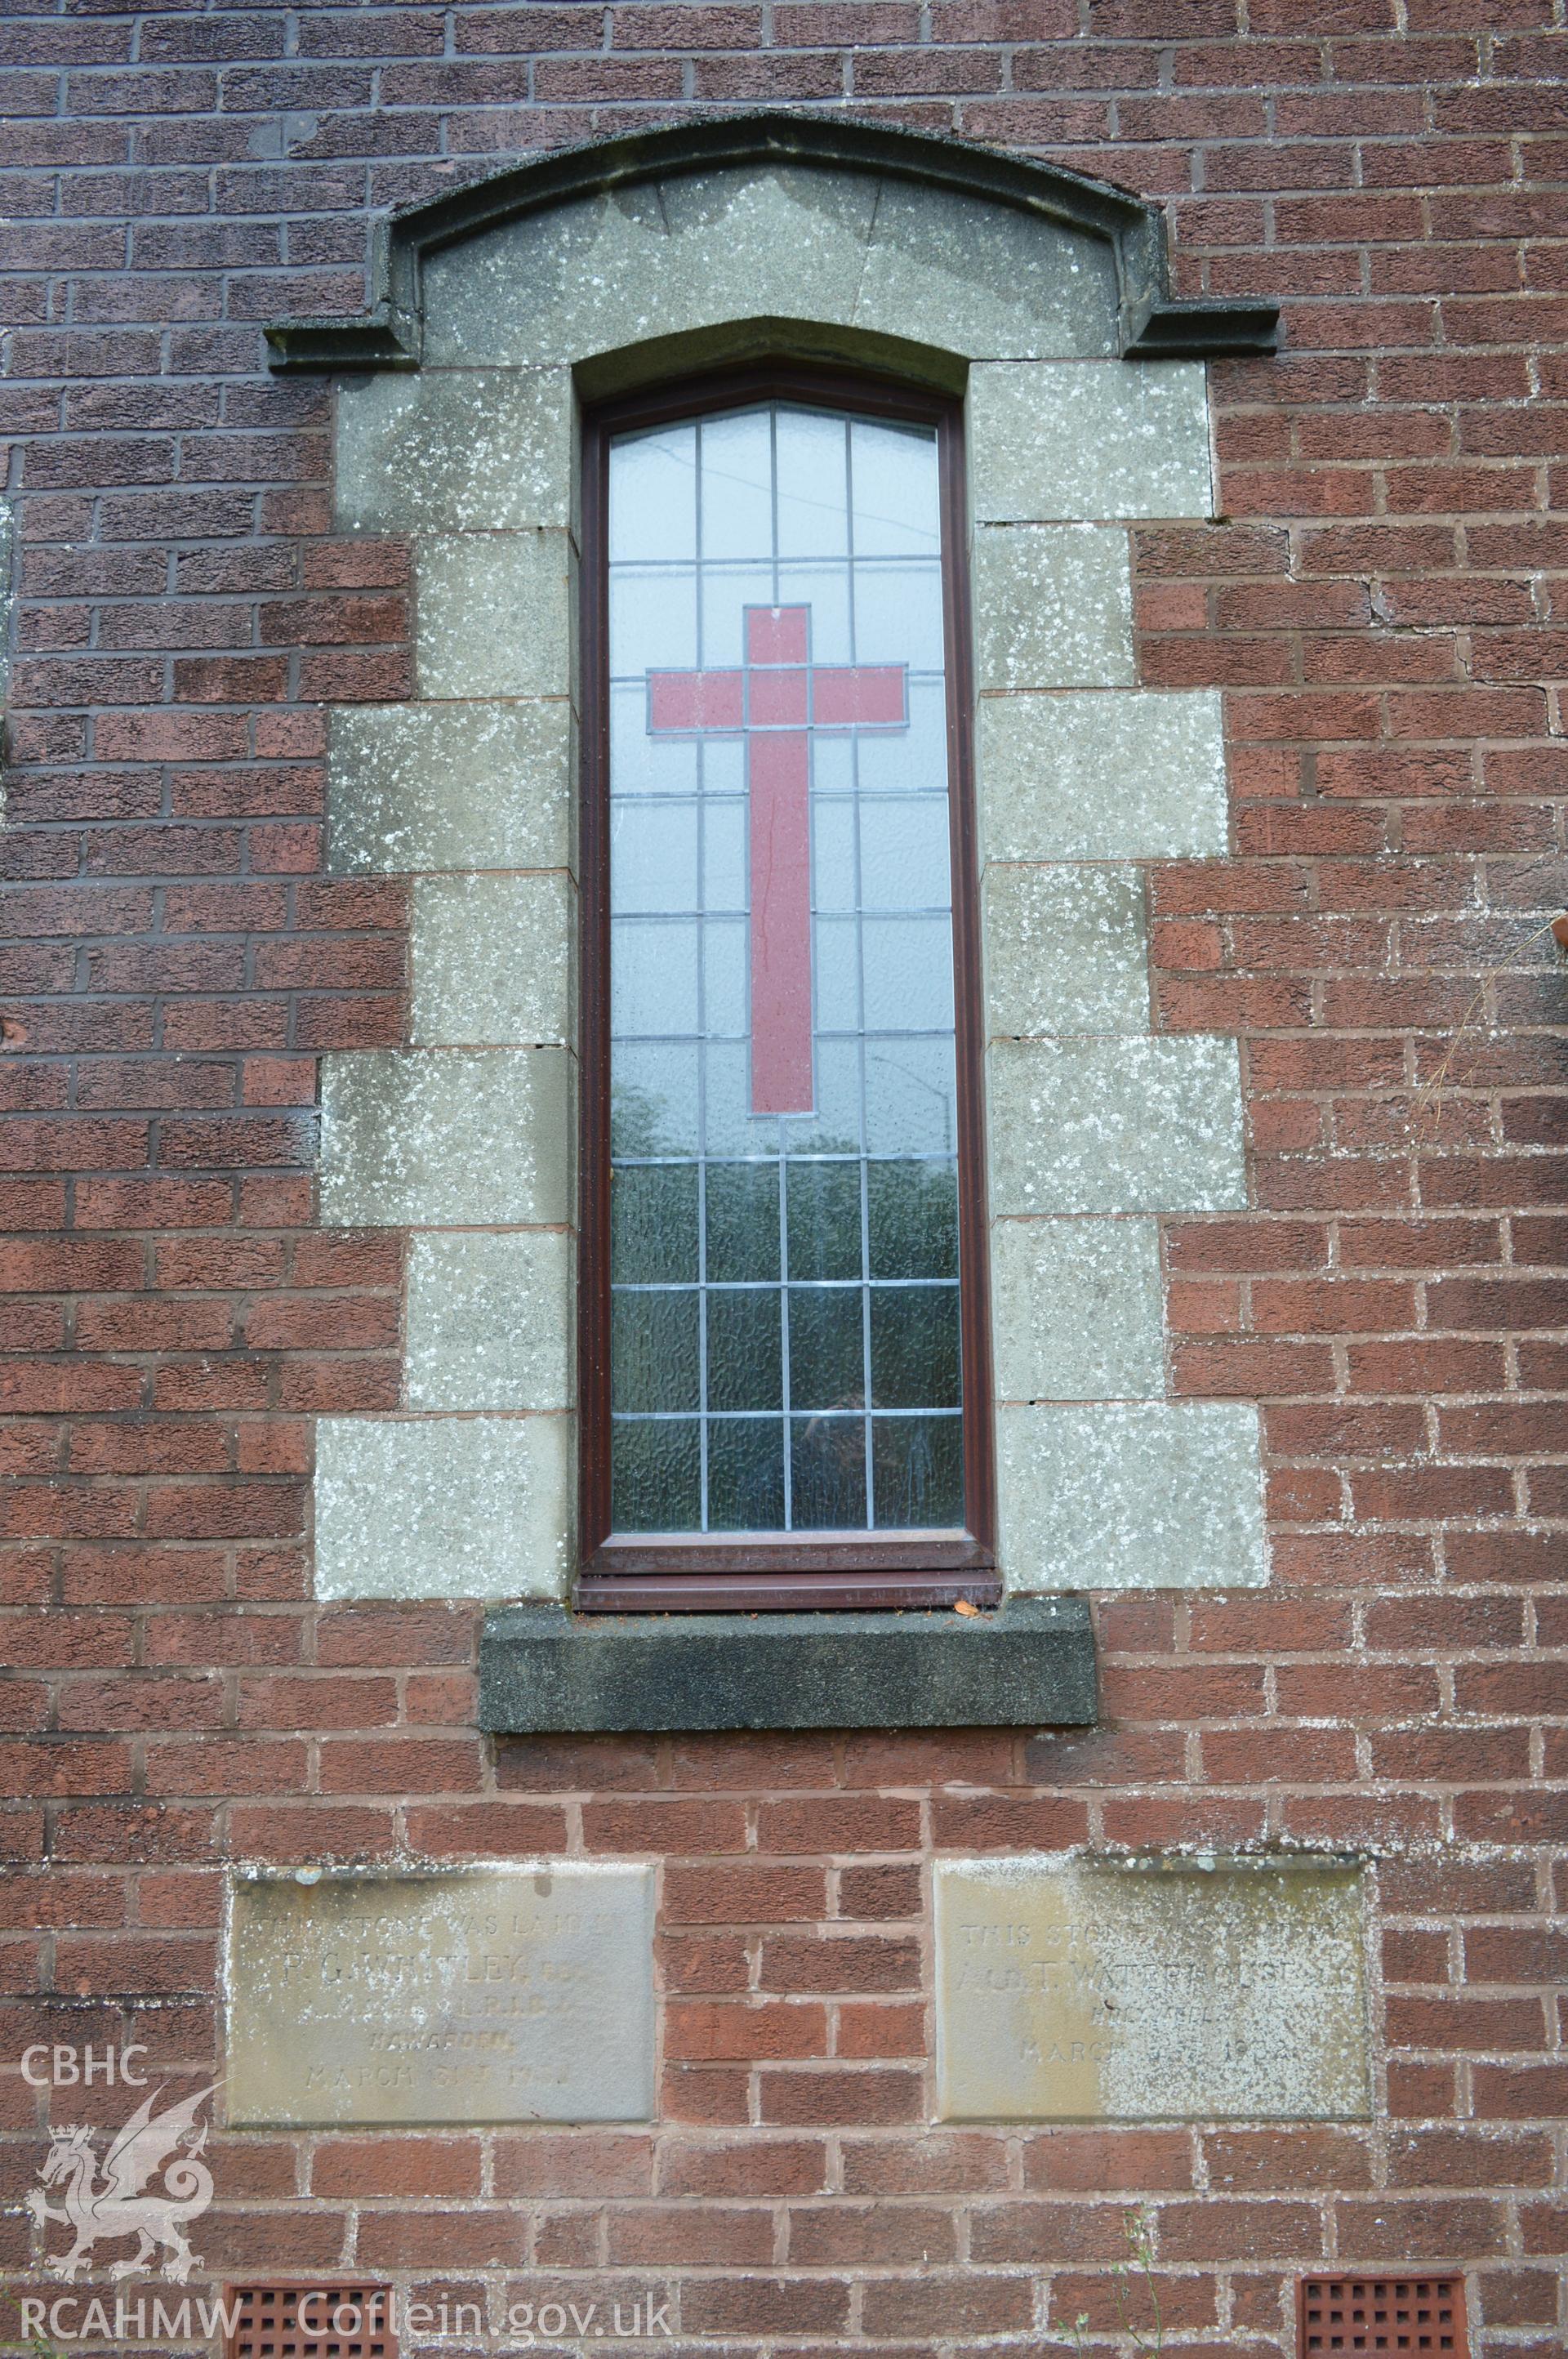 External view showing memorial stone on west elevation of the Church. Digital colour photograph taken during CPAT Project 2396 at the United Reformed Church in Northop. Prepared by Clwyd Powys Archaeological Trust, 2018-2019.